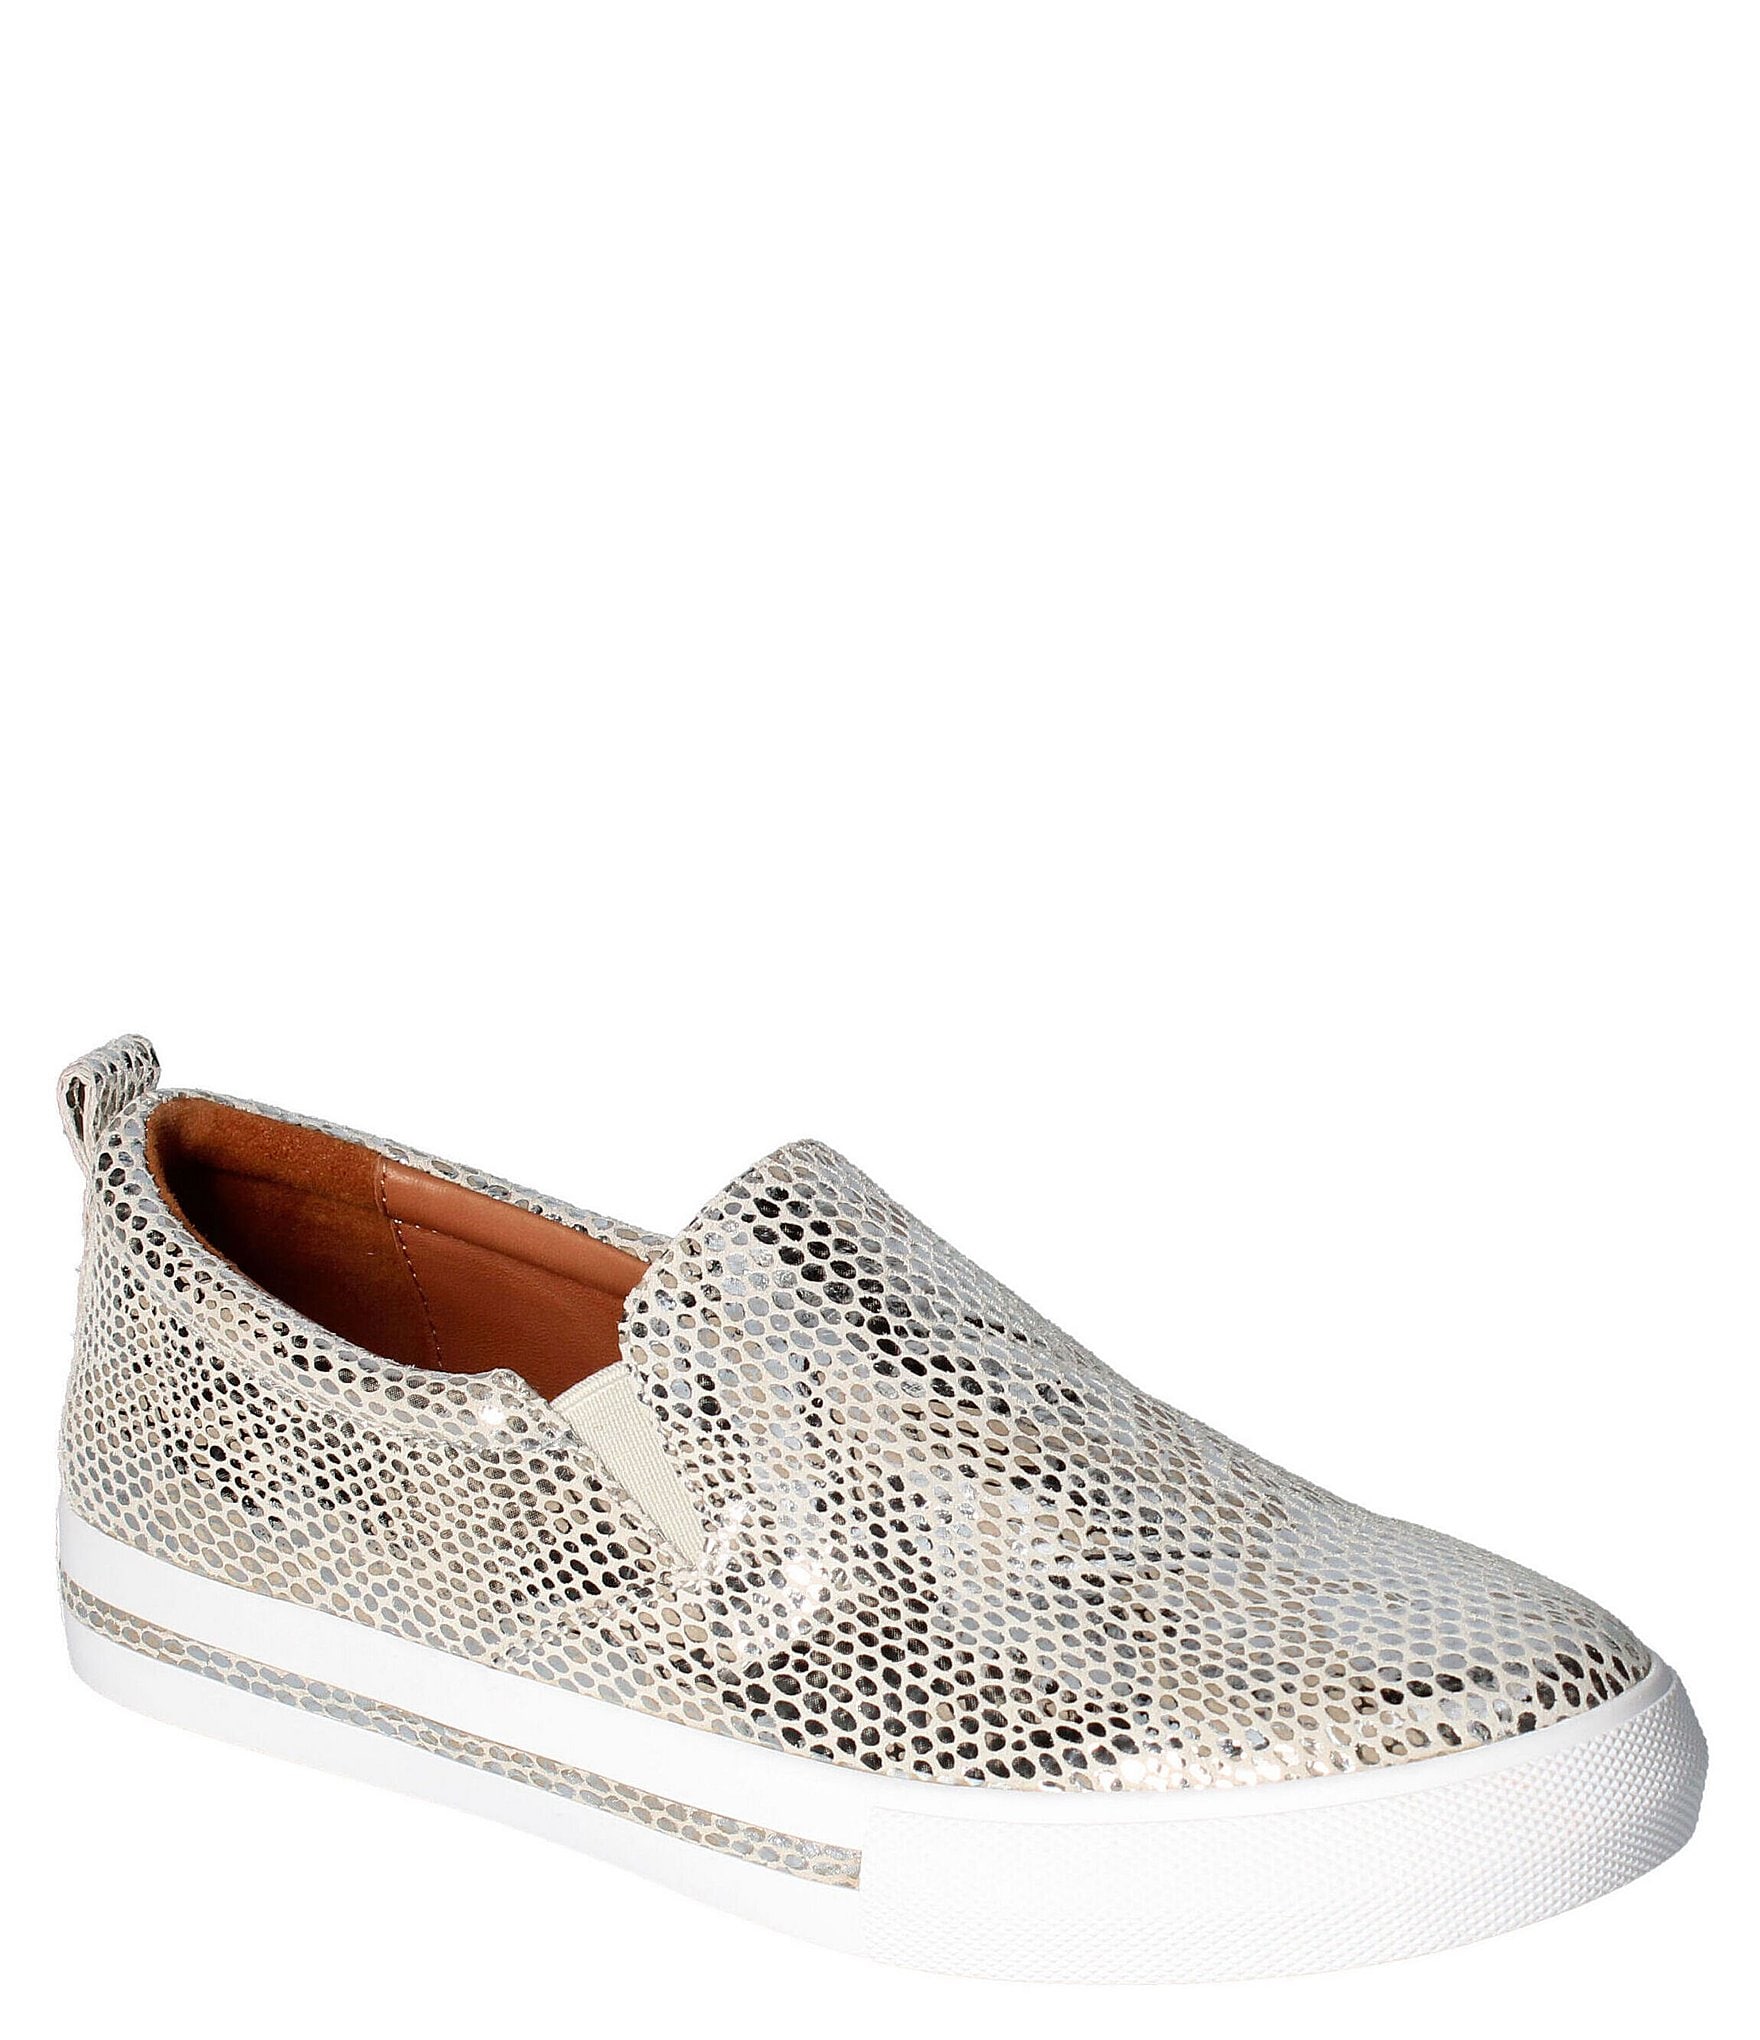 L'Amour Des Pieds Kamada Snake-Embossed Leather Sneakers | Dillard's